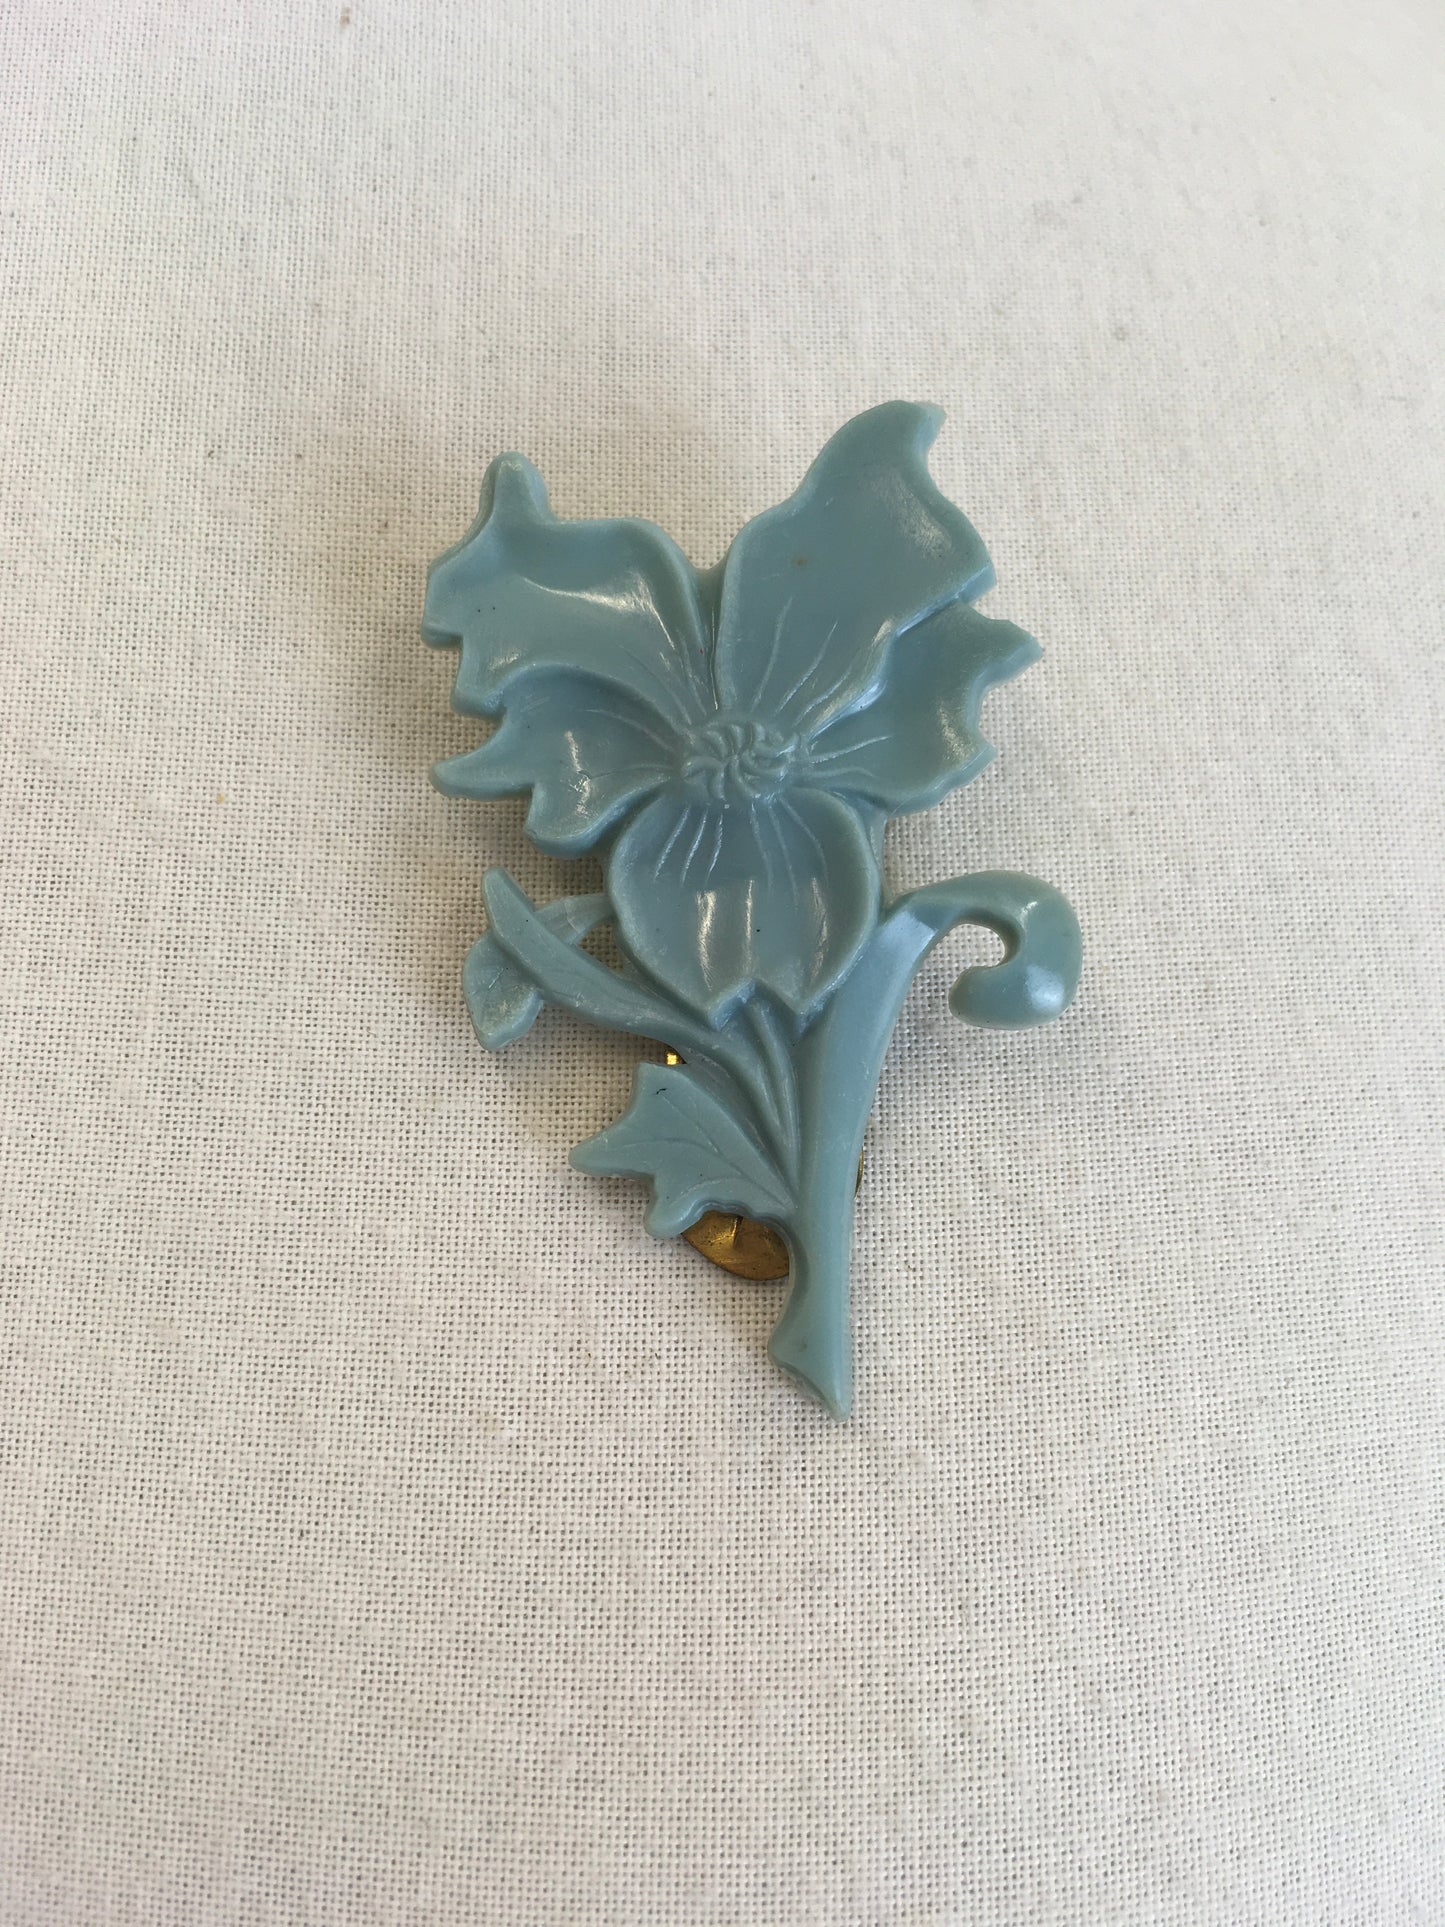 Original Late 1930’s Early 1940’s Plastic Floral Dress Clip - In Pale Duck Egg